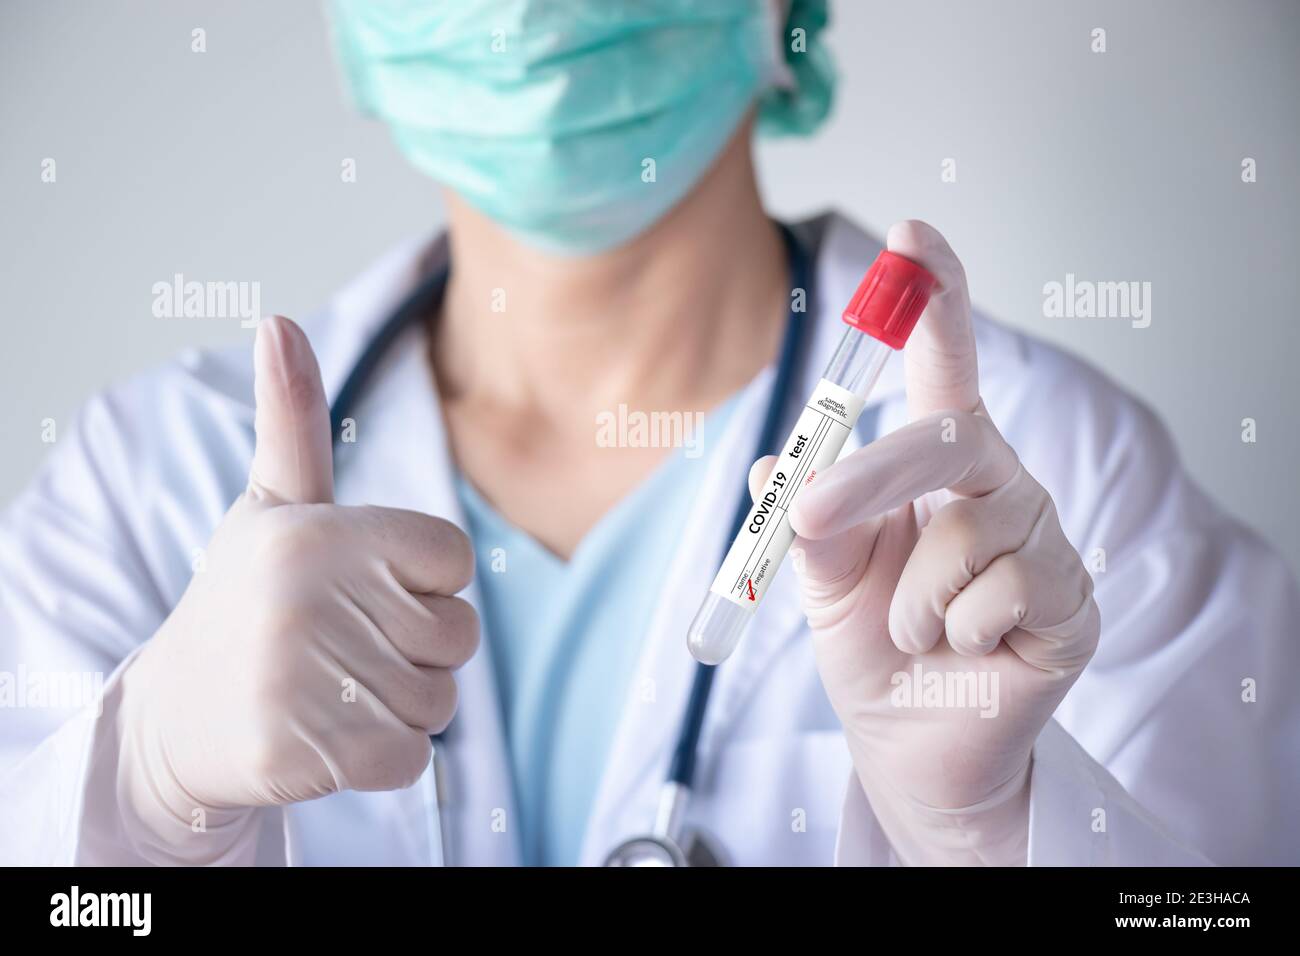 coronavirus COVID-19 test. doctor hand holding infection test tube with patient nasal secretion sample for negative result label and thumb up gesture Stock Photo